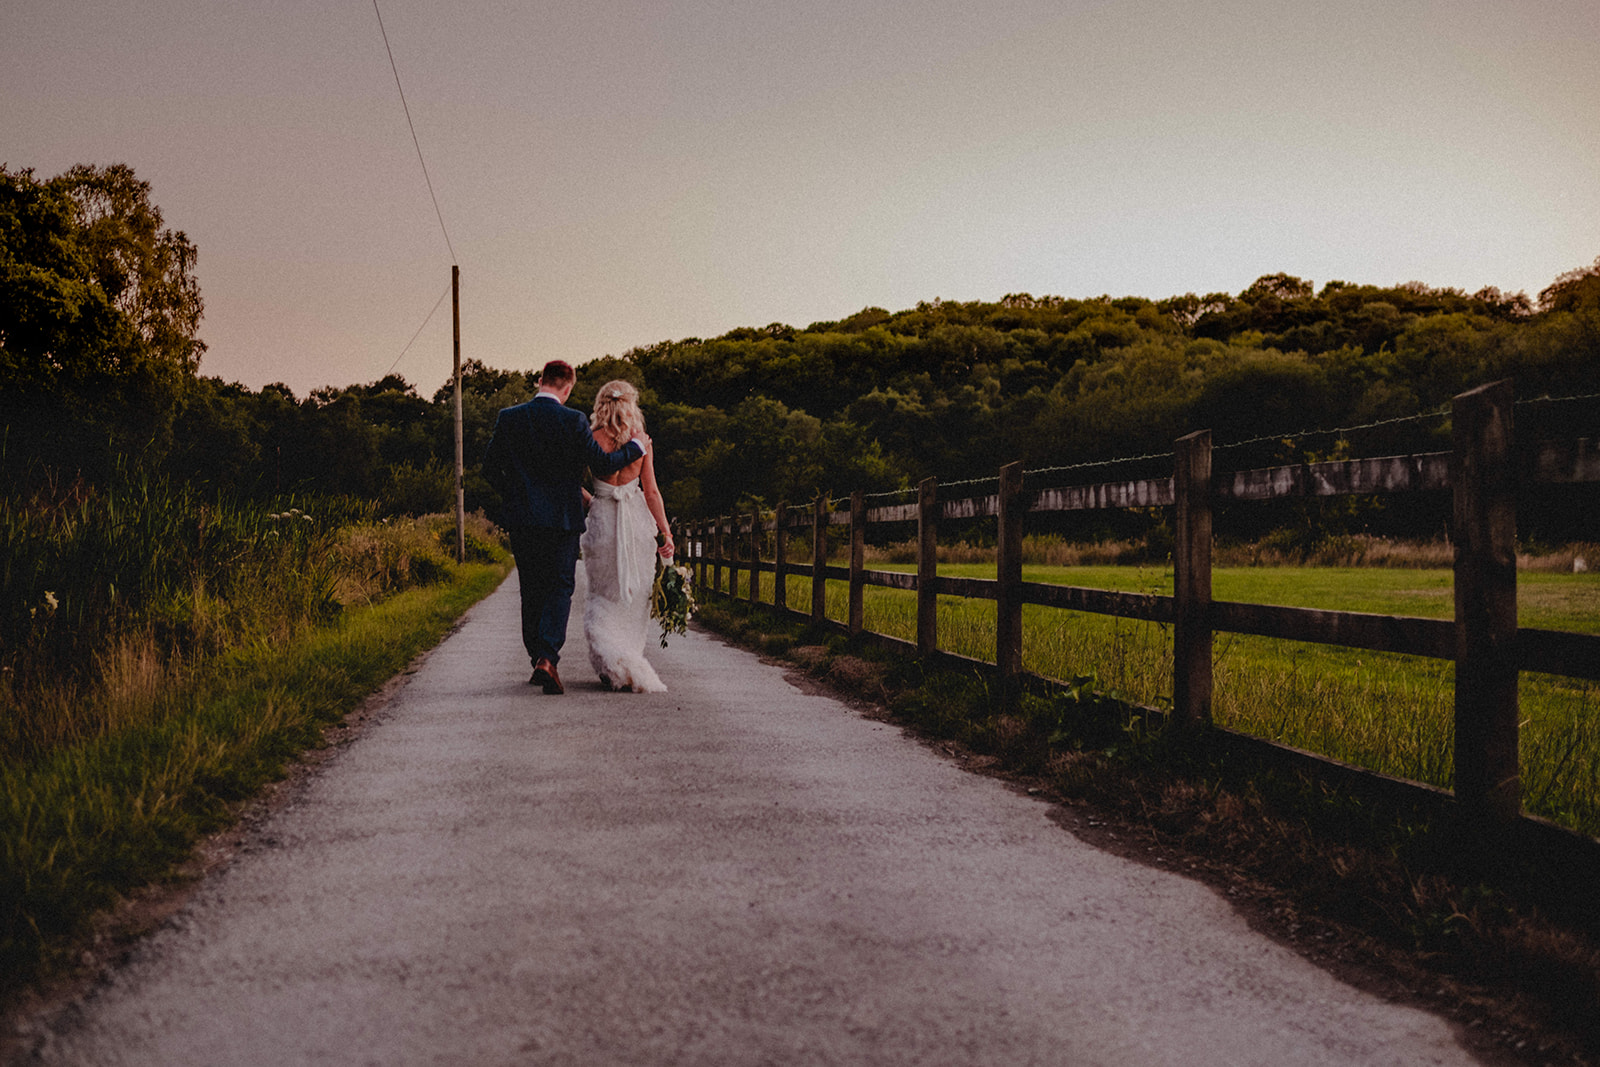 Couple in love walking during a Stockport wedding.